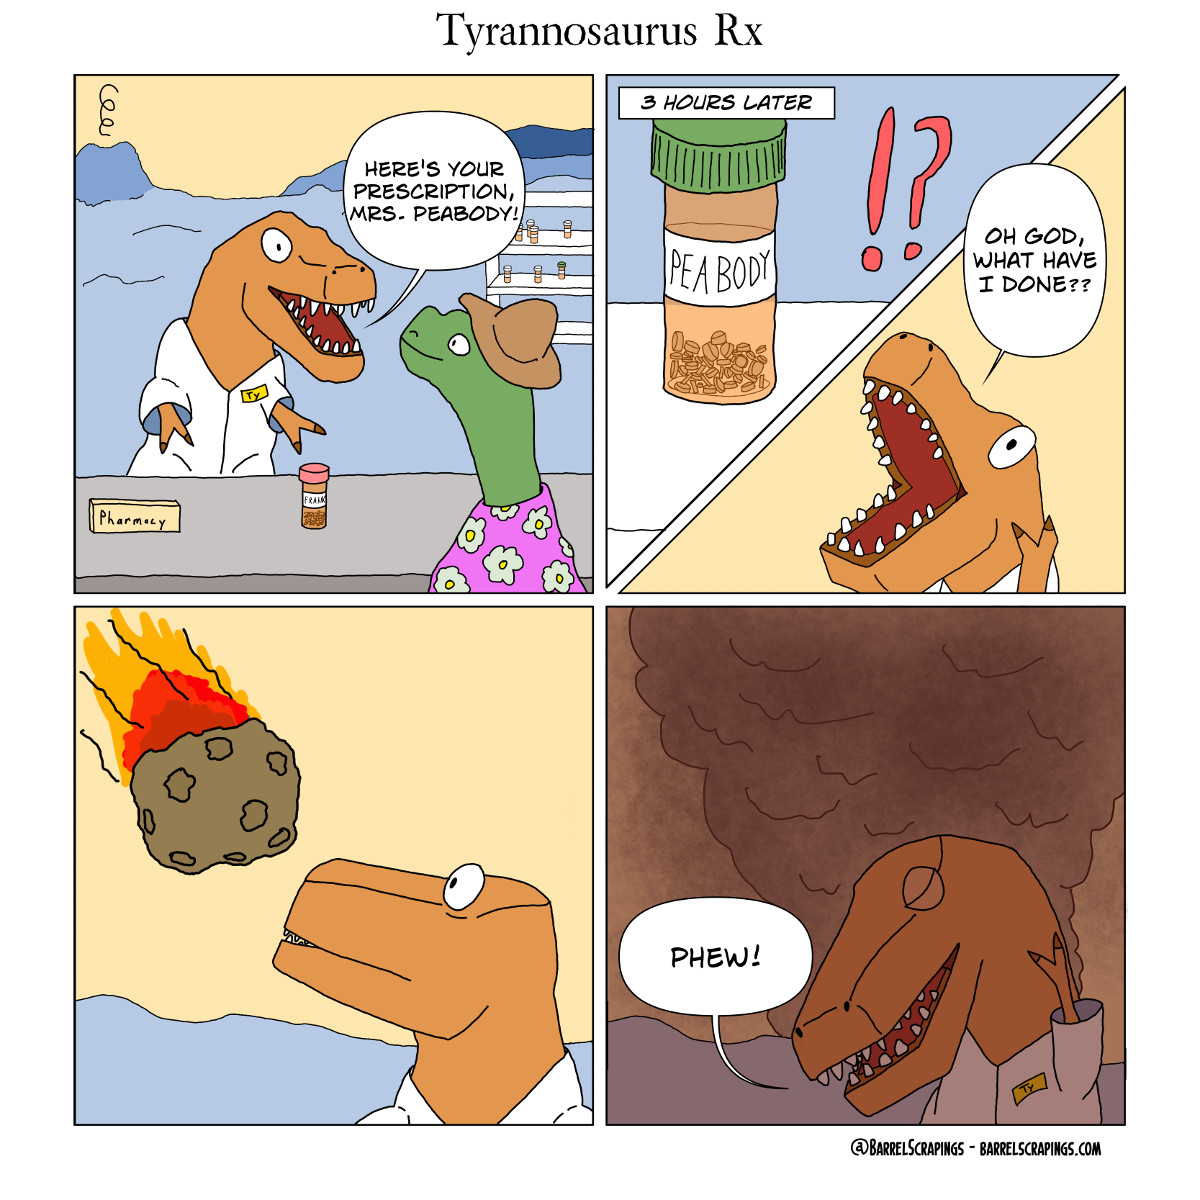 Panel 1: At a pharmacy. T-Rex with “Ty” nametag is serving a green dinosaur in flowered dress. He says, “Your prescription is ready, Mrs. Peabody!”. The label on the prescription he hands her says Frank. Panel 2: 3 hours later, he finds Mrs. Peabody’s prescription still on the shelf. He shouts, “Oh god, what have I done?” Panel 3: He sees a meteor hurtling towards earth. Panel 4: The sky is filled with smoke and the end is nigh. He wipes his brow and says, “Phew”